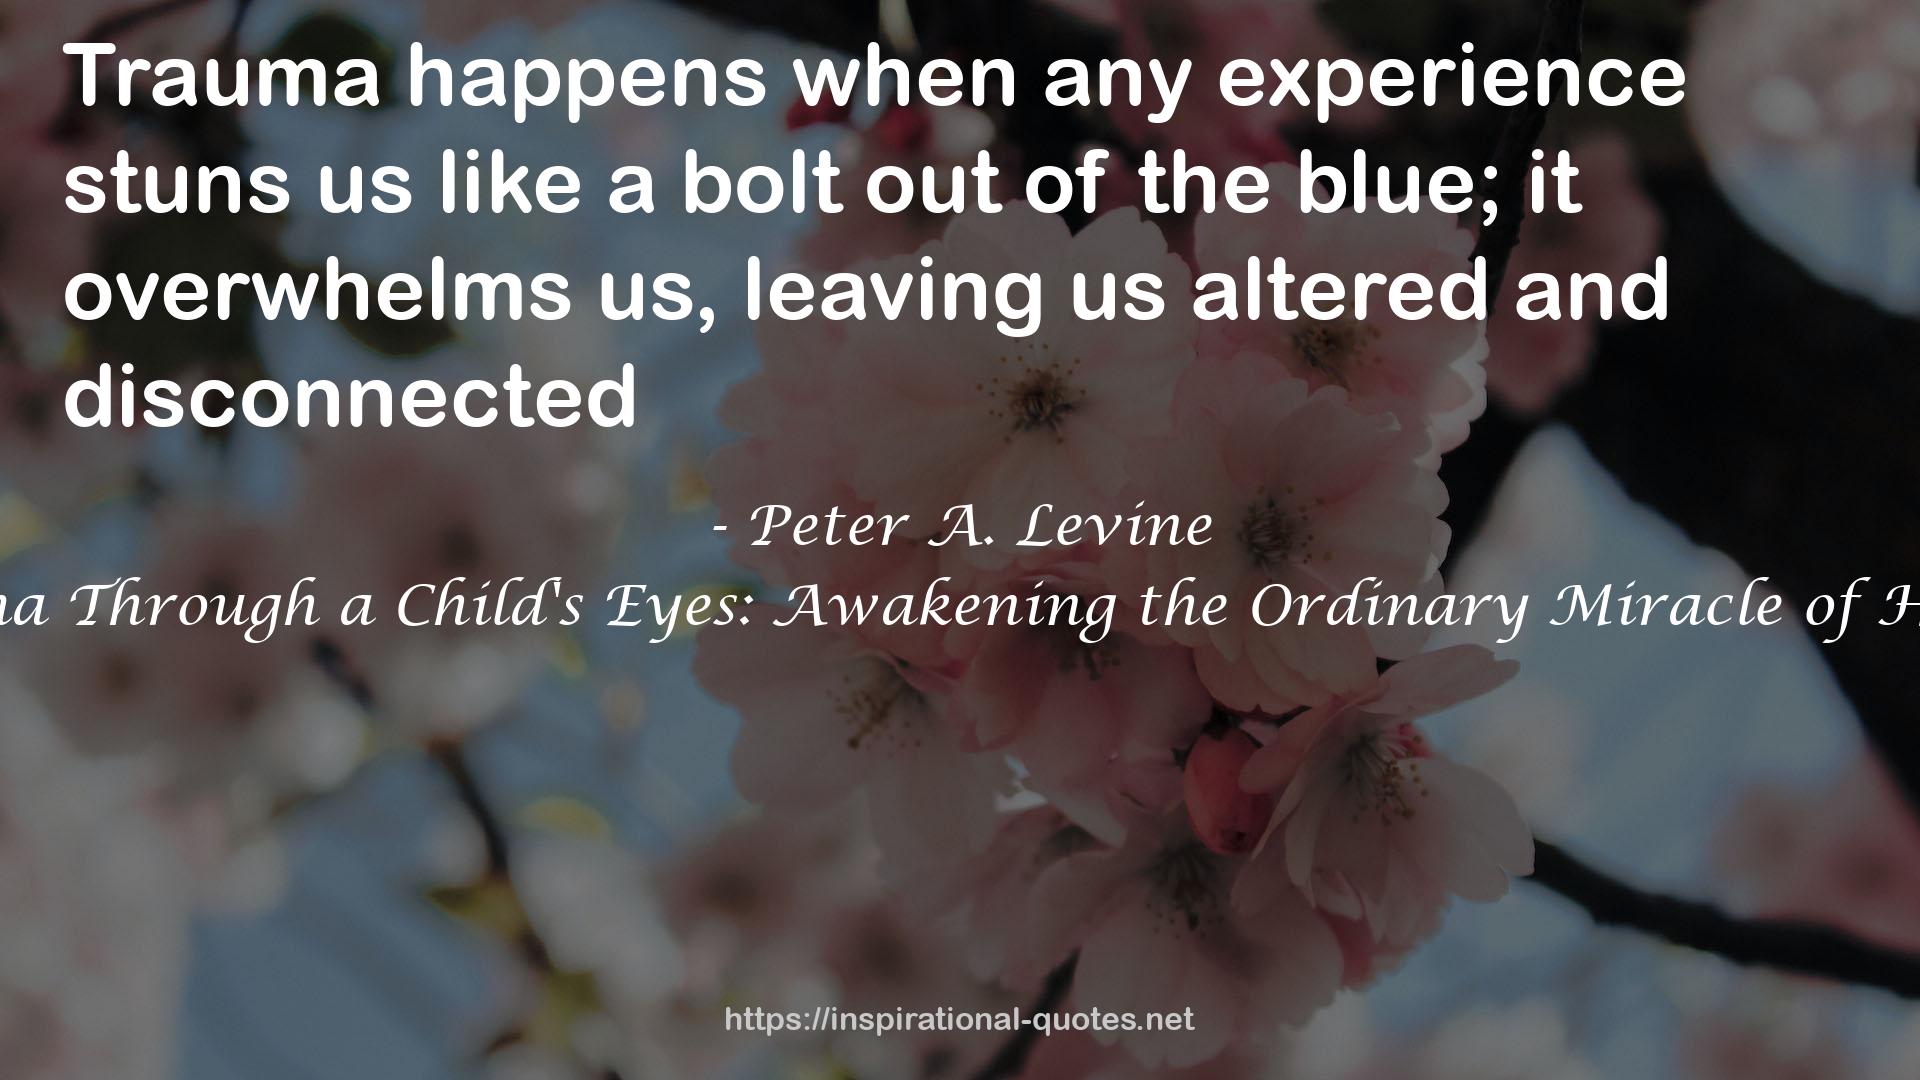 Trauma Through a Child's Eyes: Awakening the Ordinary Miracle of Healing QUOTES